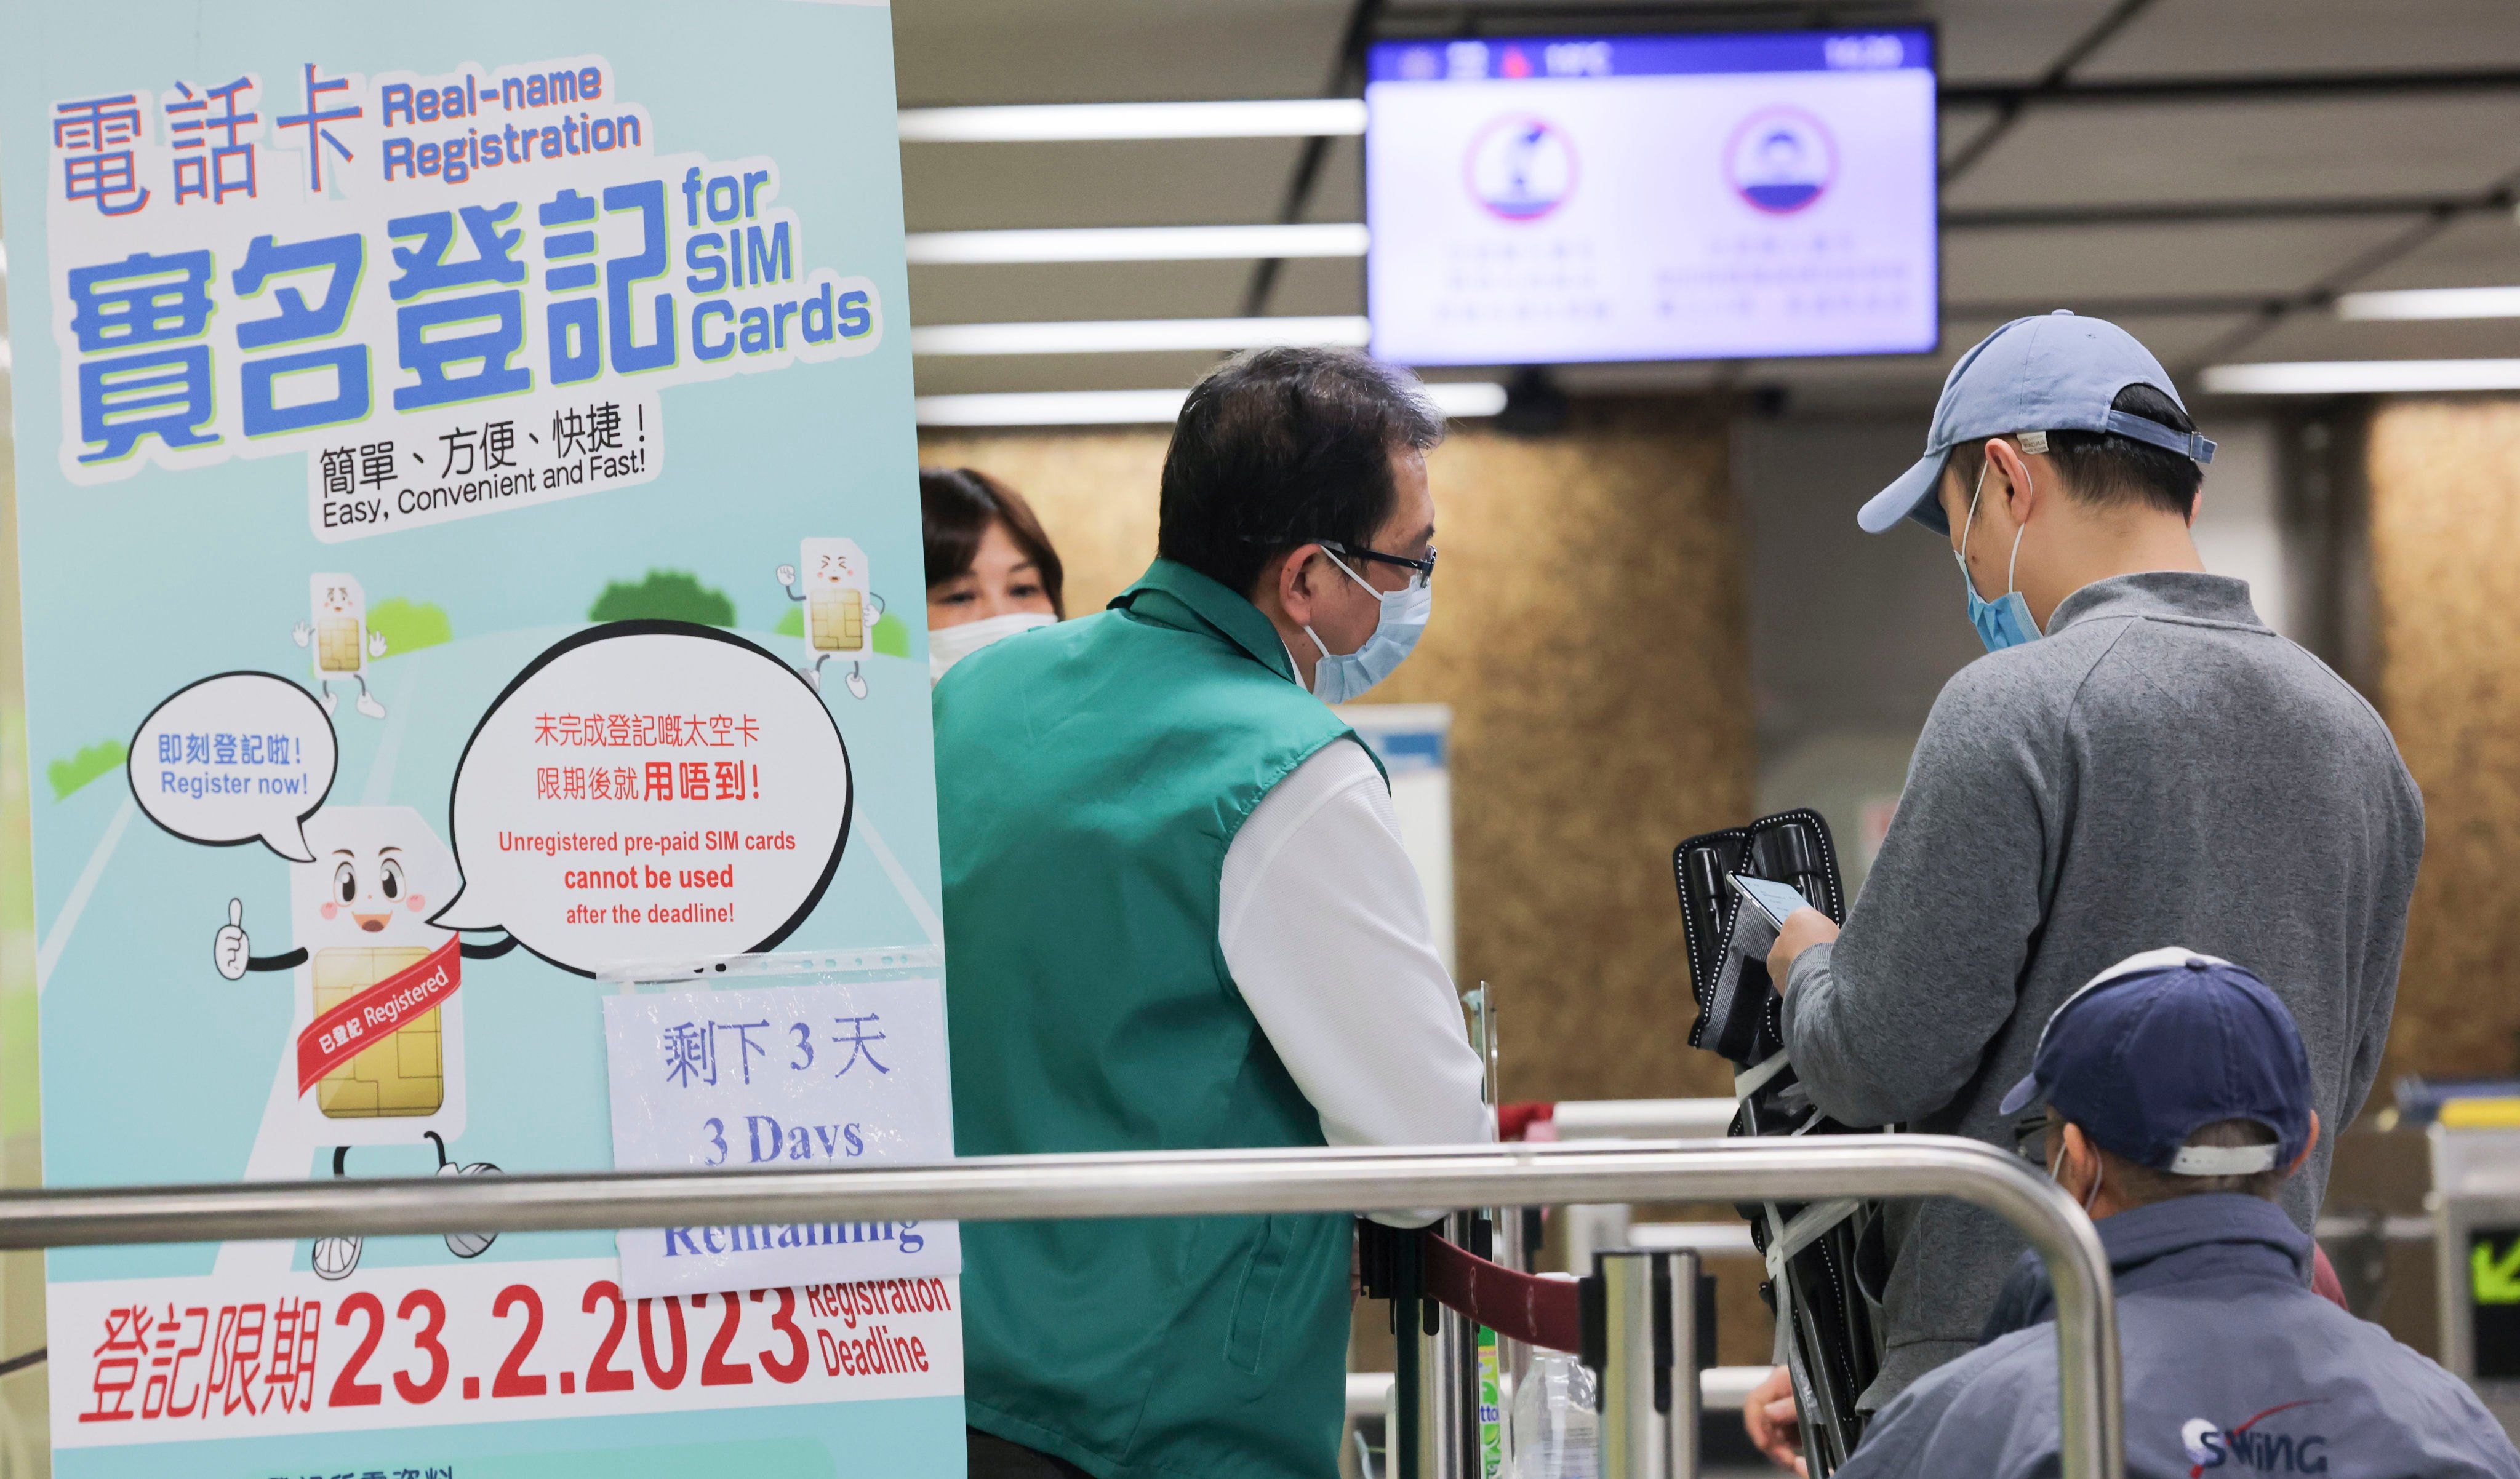 People queue up to register for SIM card at a support station in the Wong Tai Sin MTR station. Photo: Jelly Tse